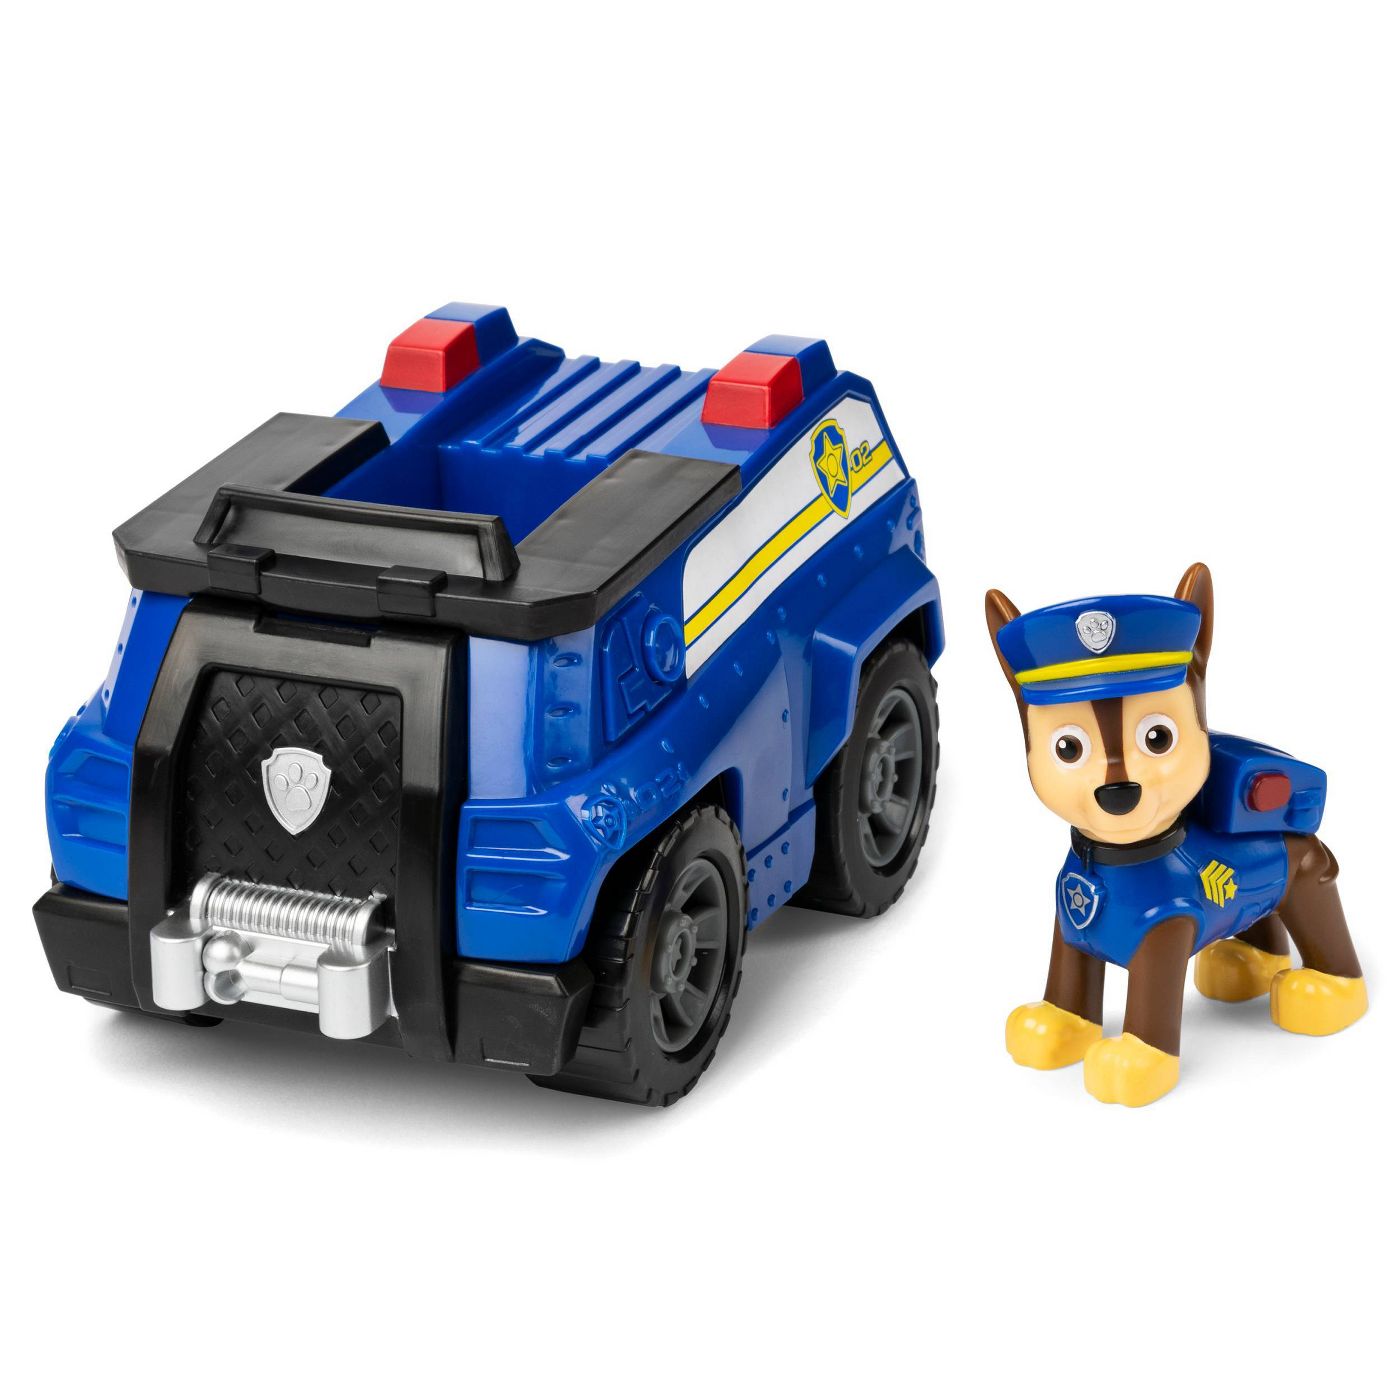 PAW Patrol Vehicles Assortment - Marshall, Chase, Sky, Zuma Pick Your Favorite (1 Count)